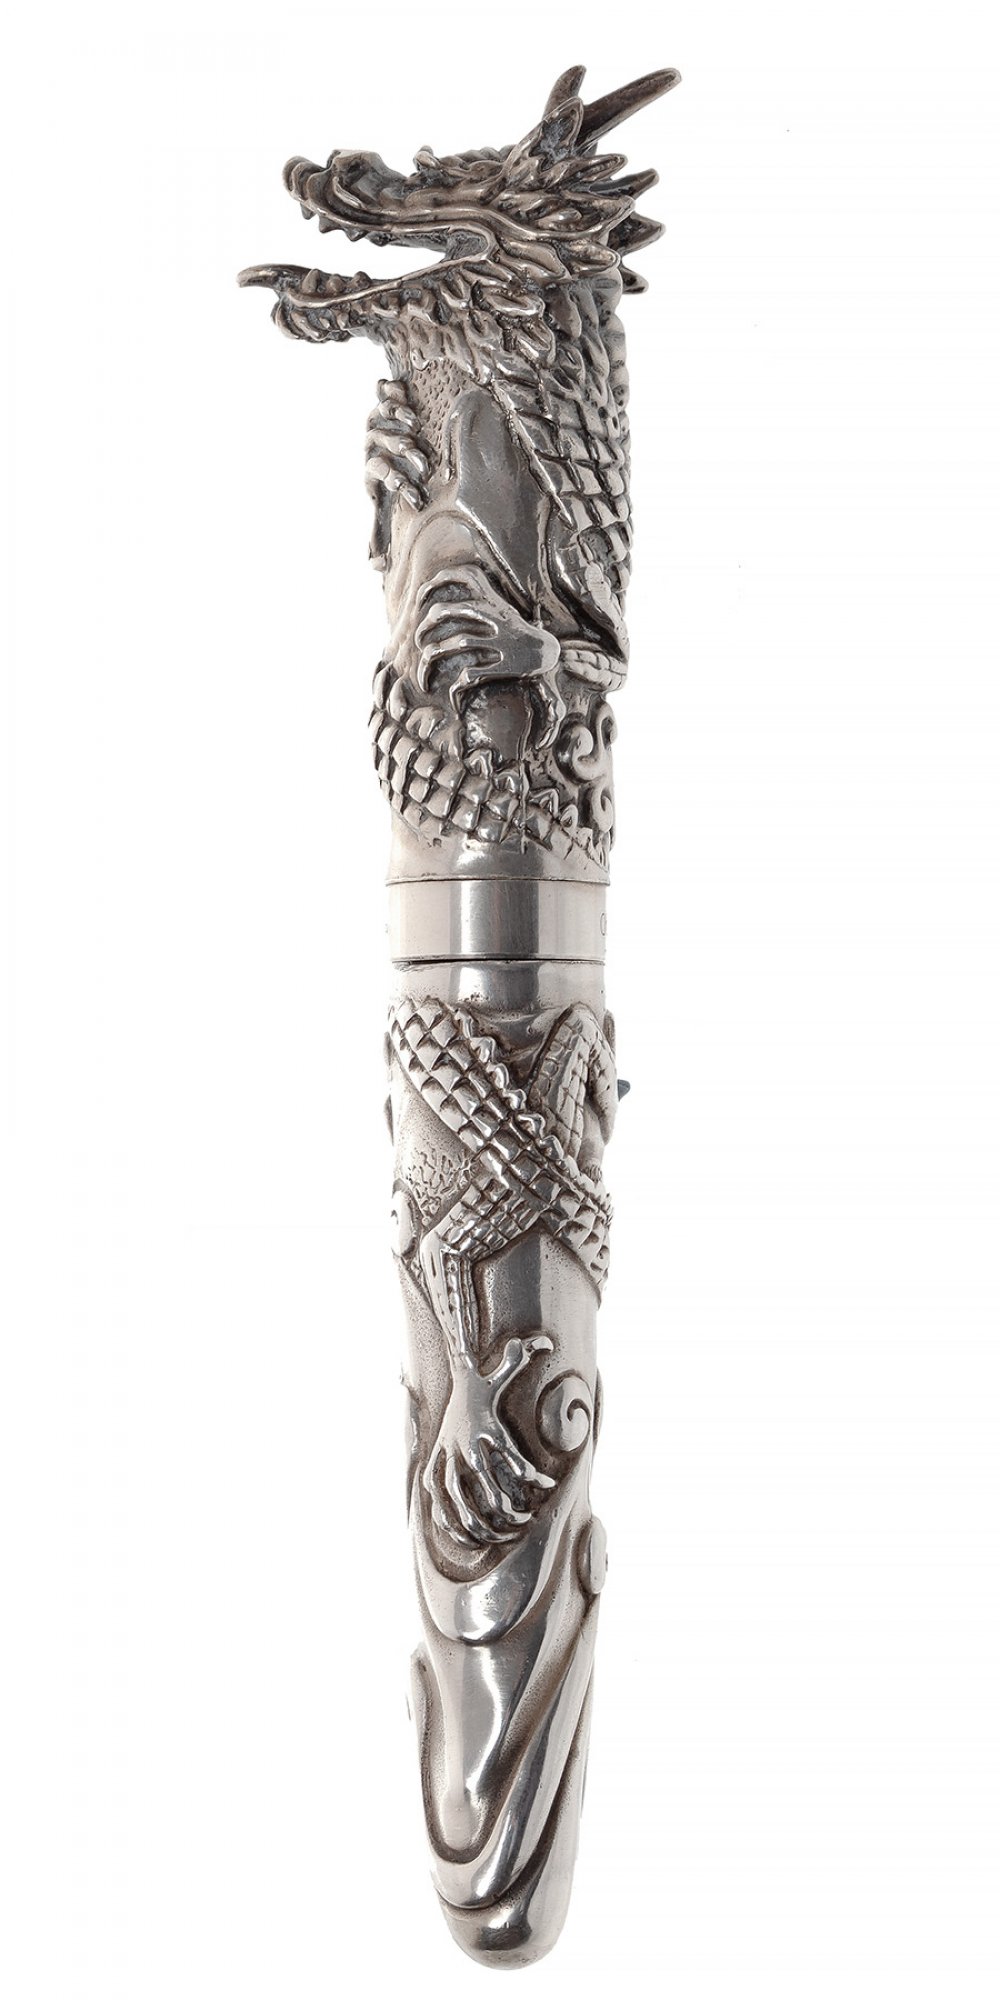 LABAN FOUNTAIN PEN.Barrel and cap in 925 sterling silver.Limited edition 64/800.Silver-plated nib,